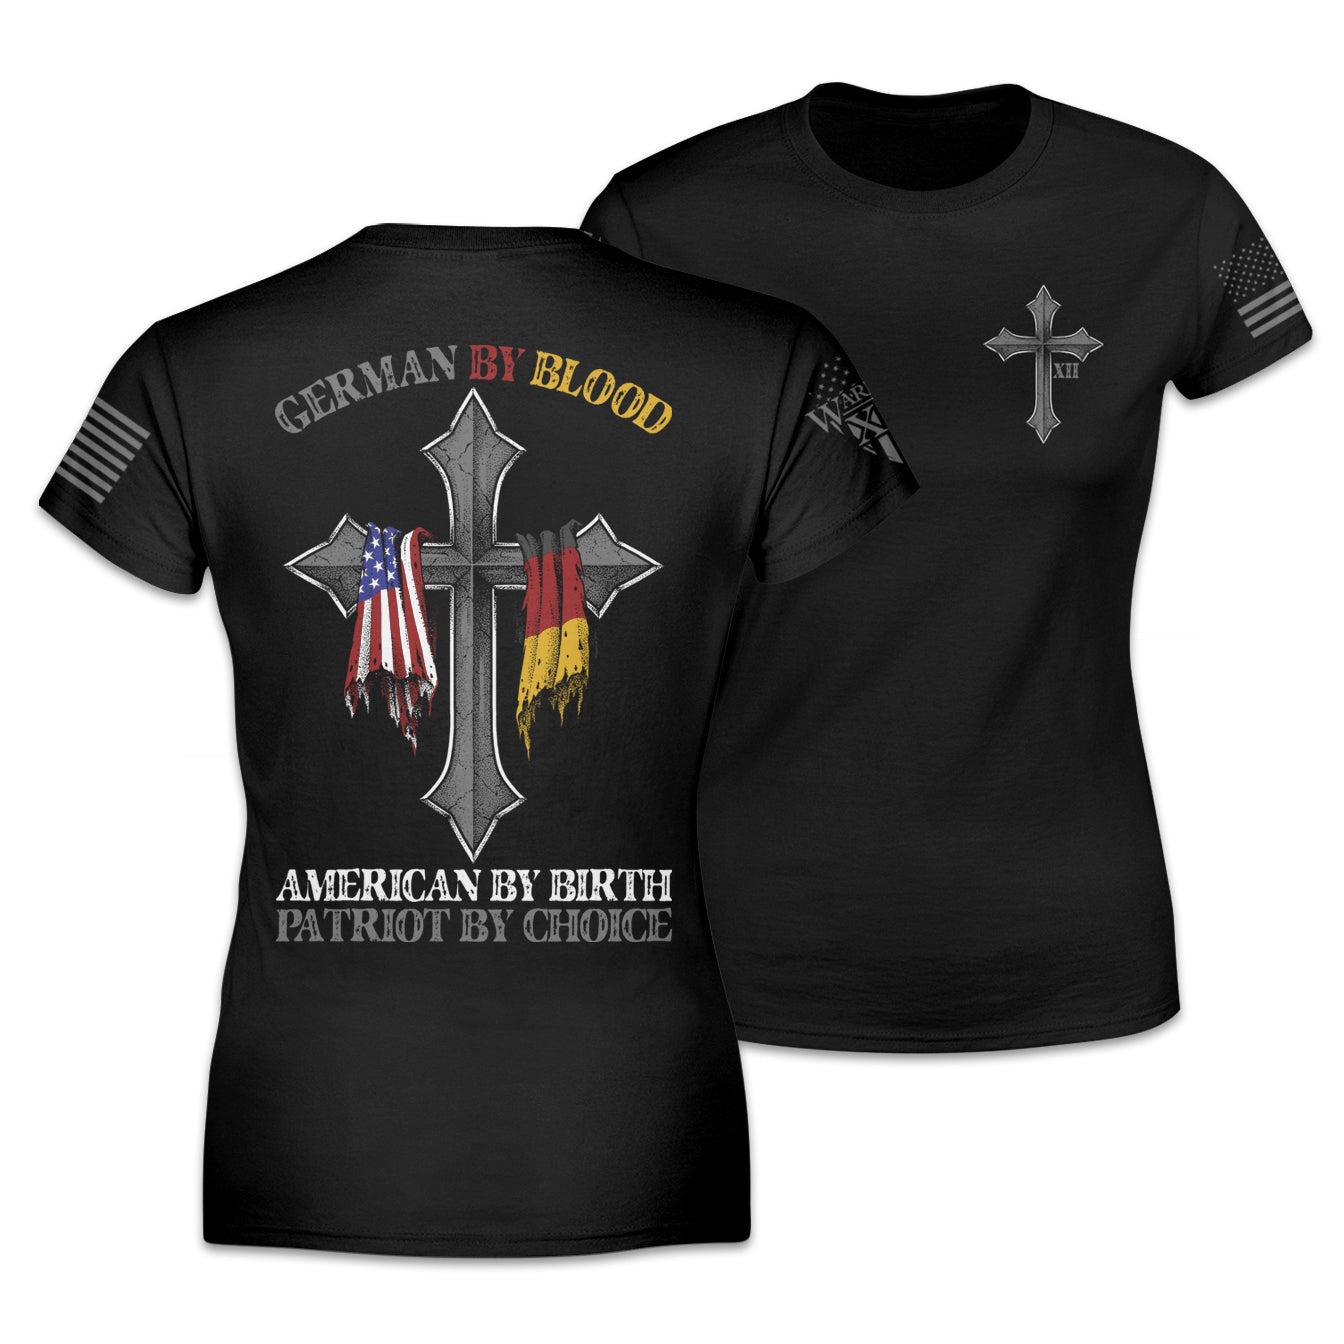 Front & back black women's relaxed fit shirt with the words 'German by blood, American by birth, patriot by choice" and a cross with the German and USA flag hanging over it printed on the shirt.